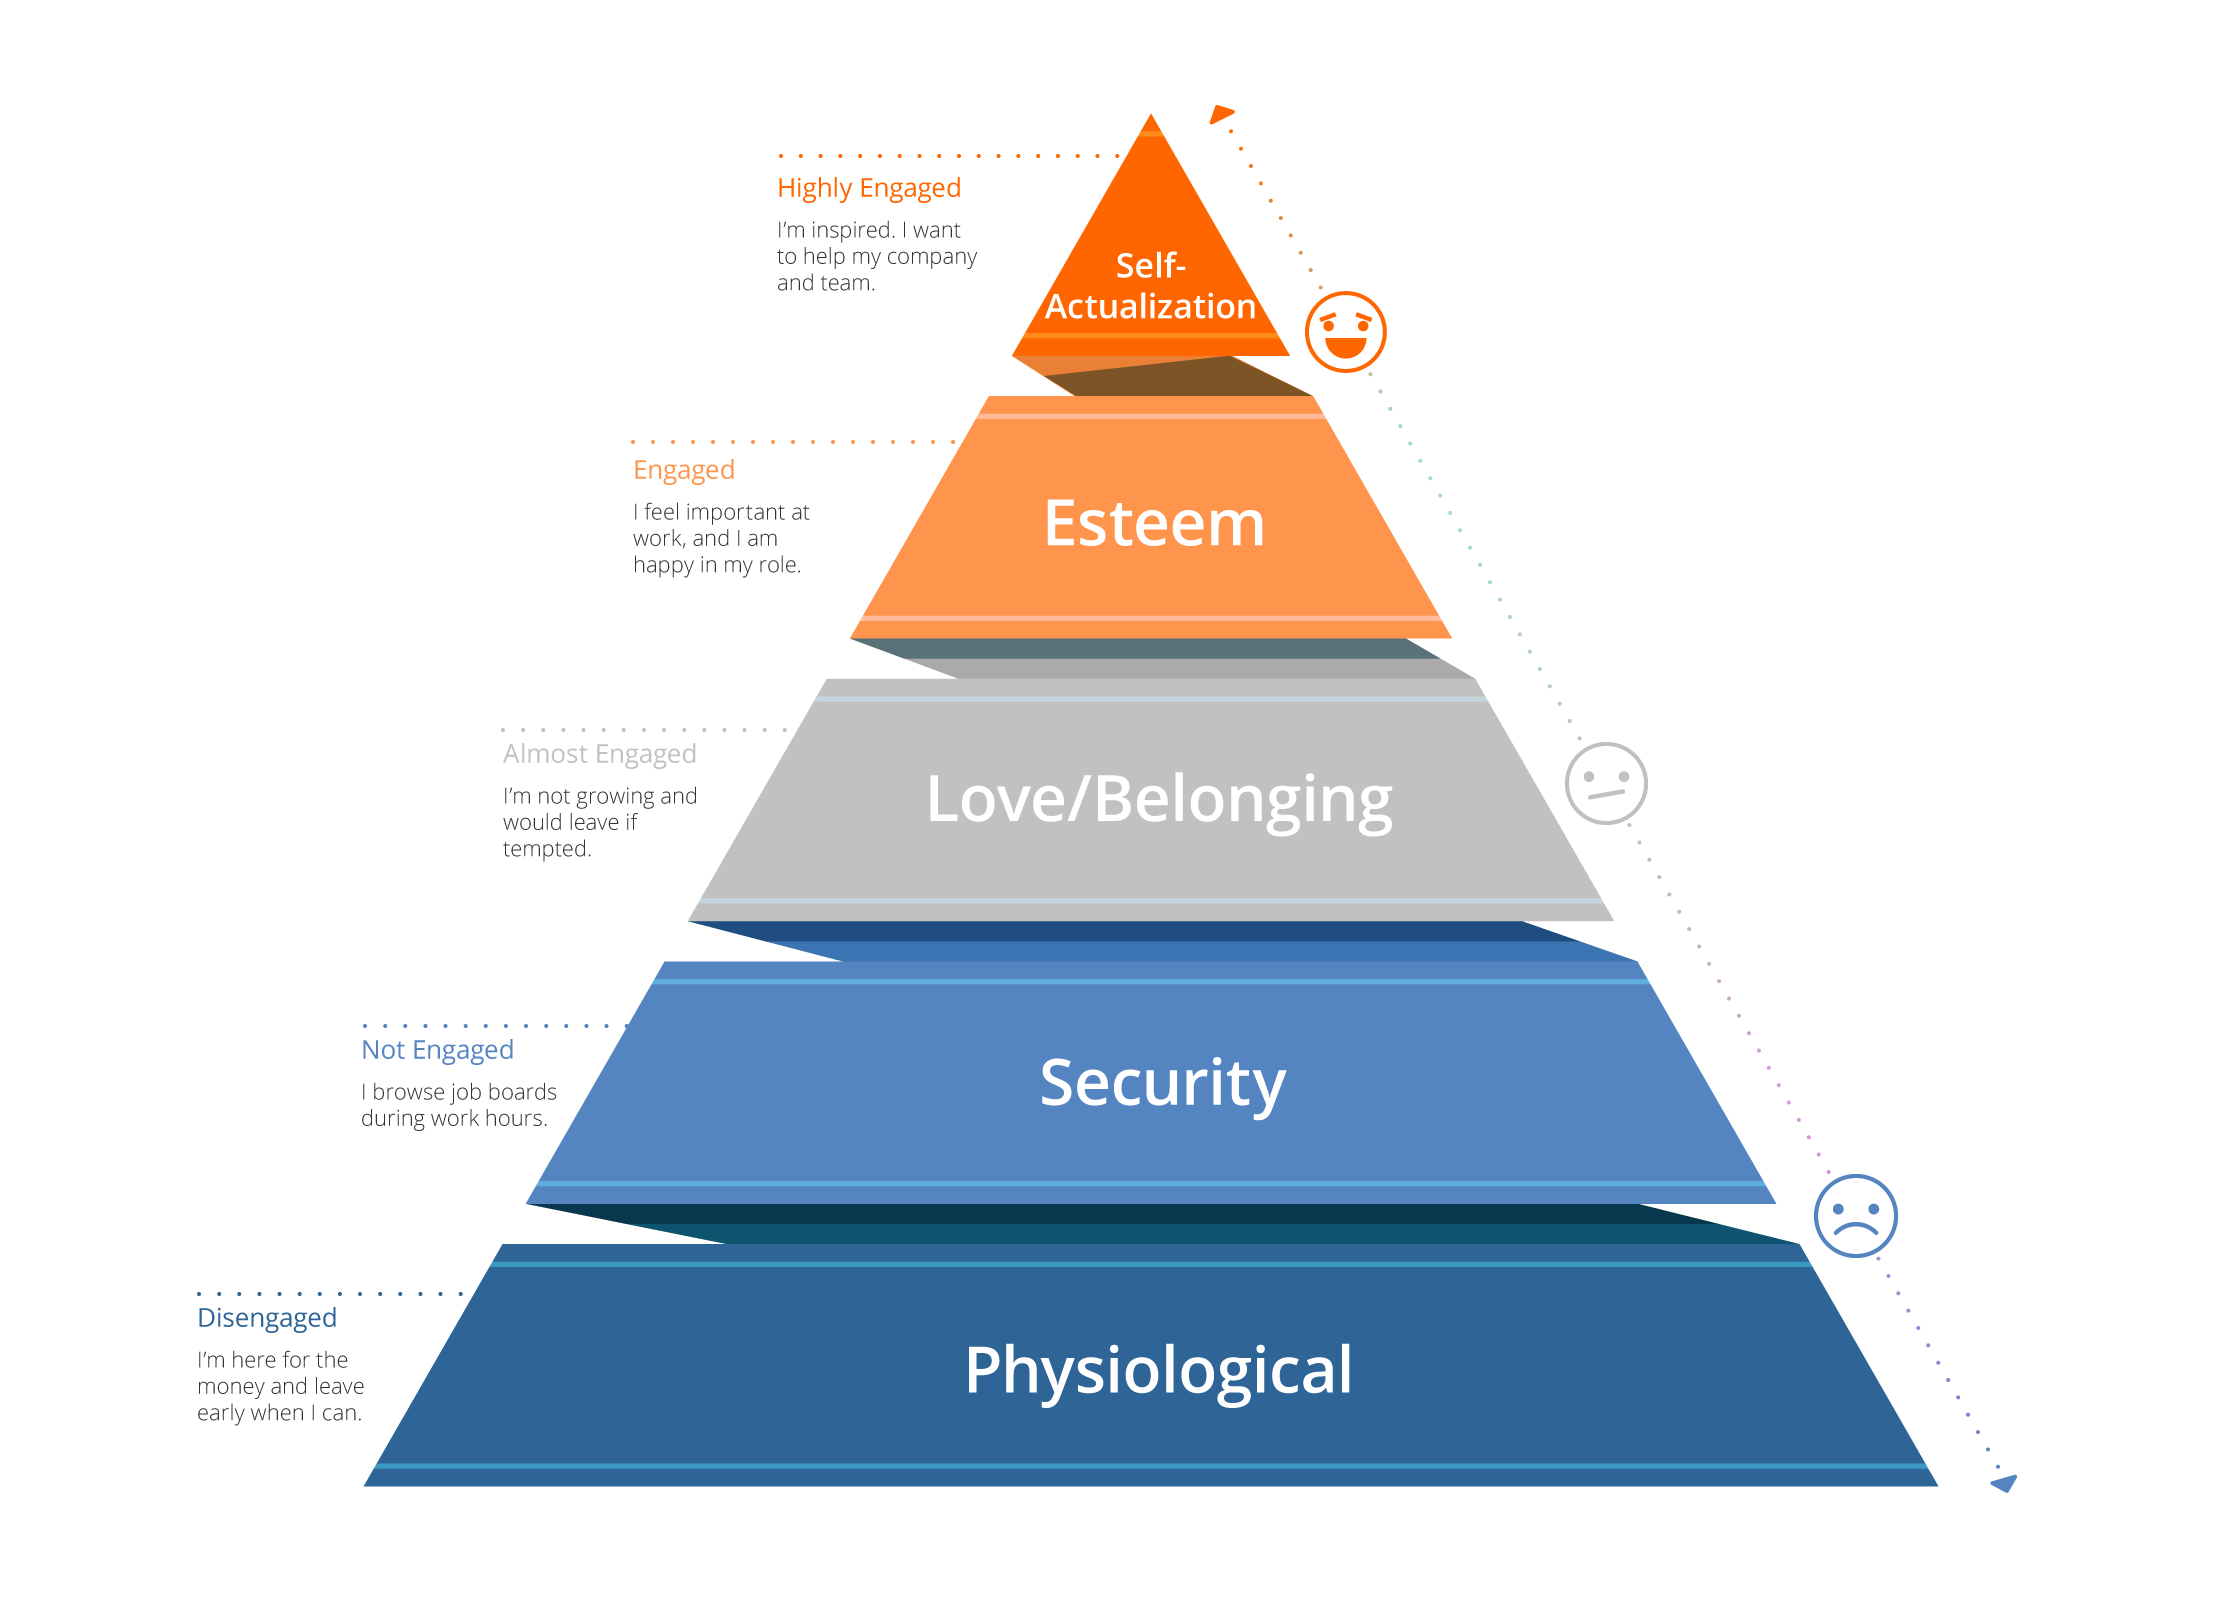 How Does Maslows Hierarchy Of Needs Apply To Your Hr Department